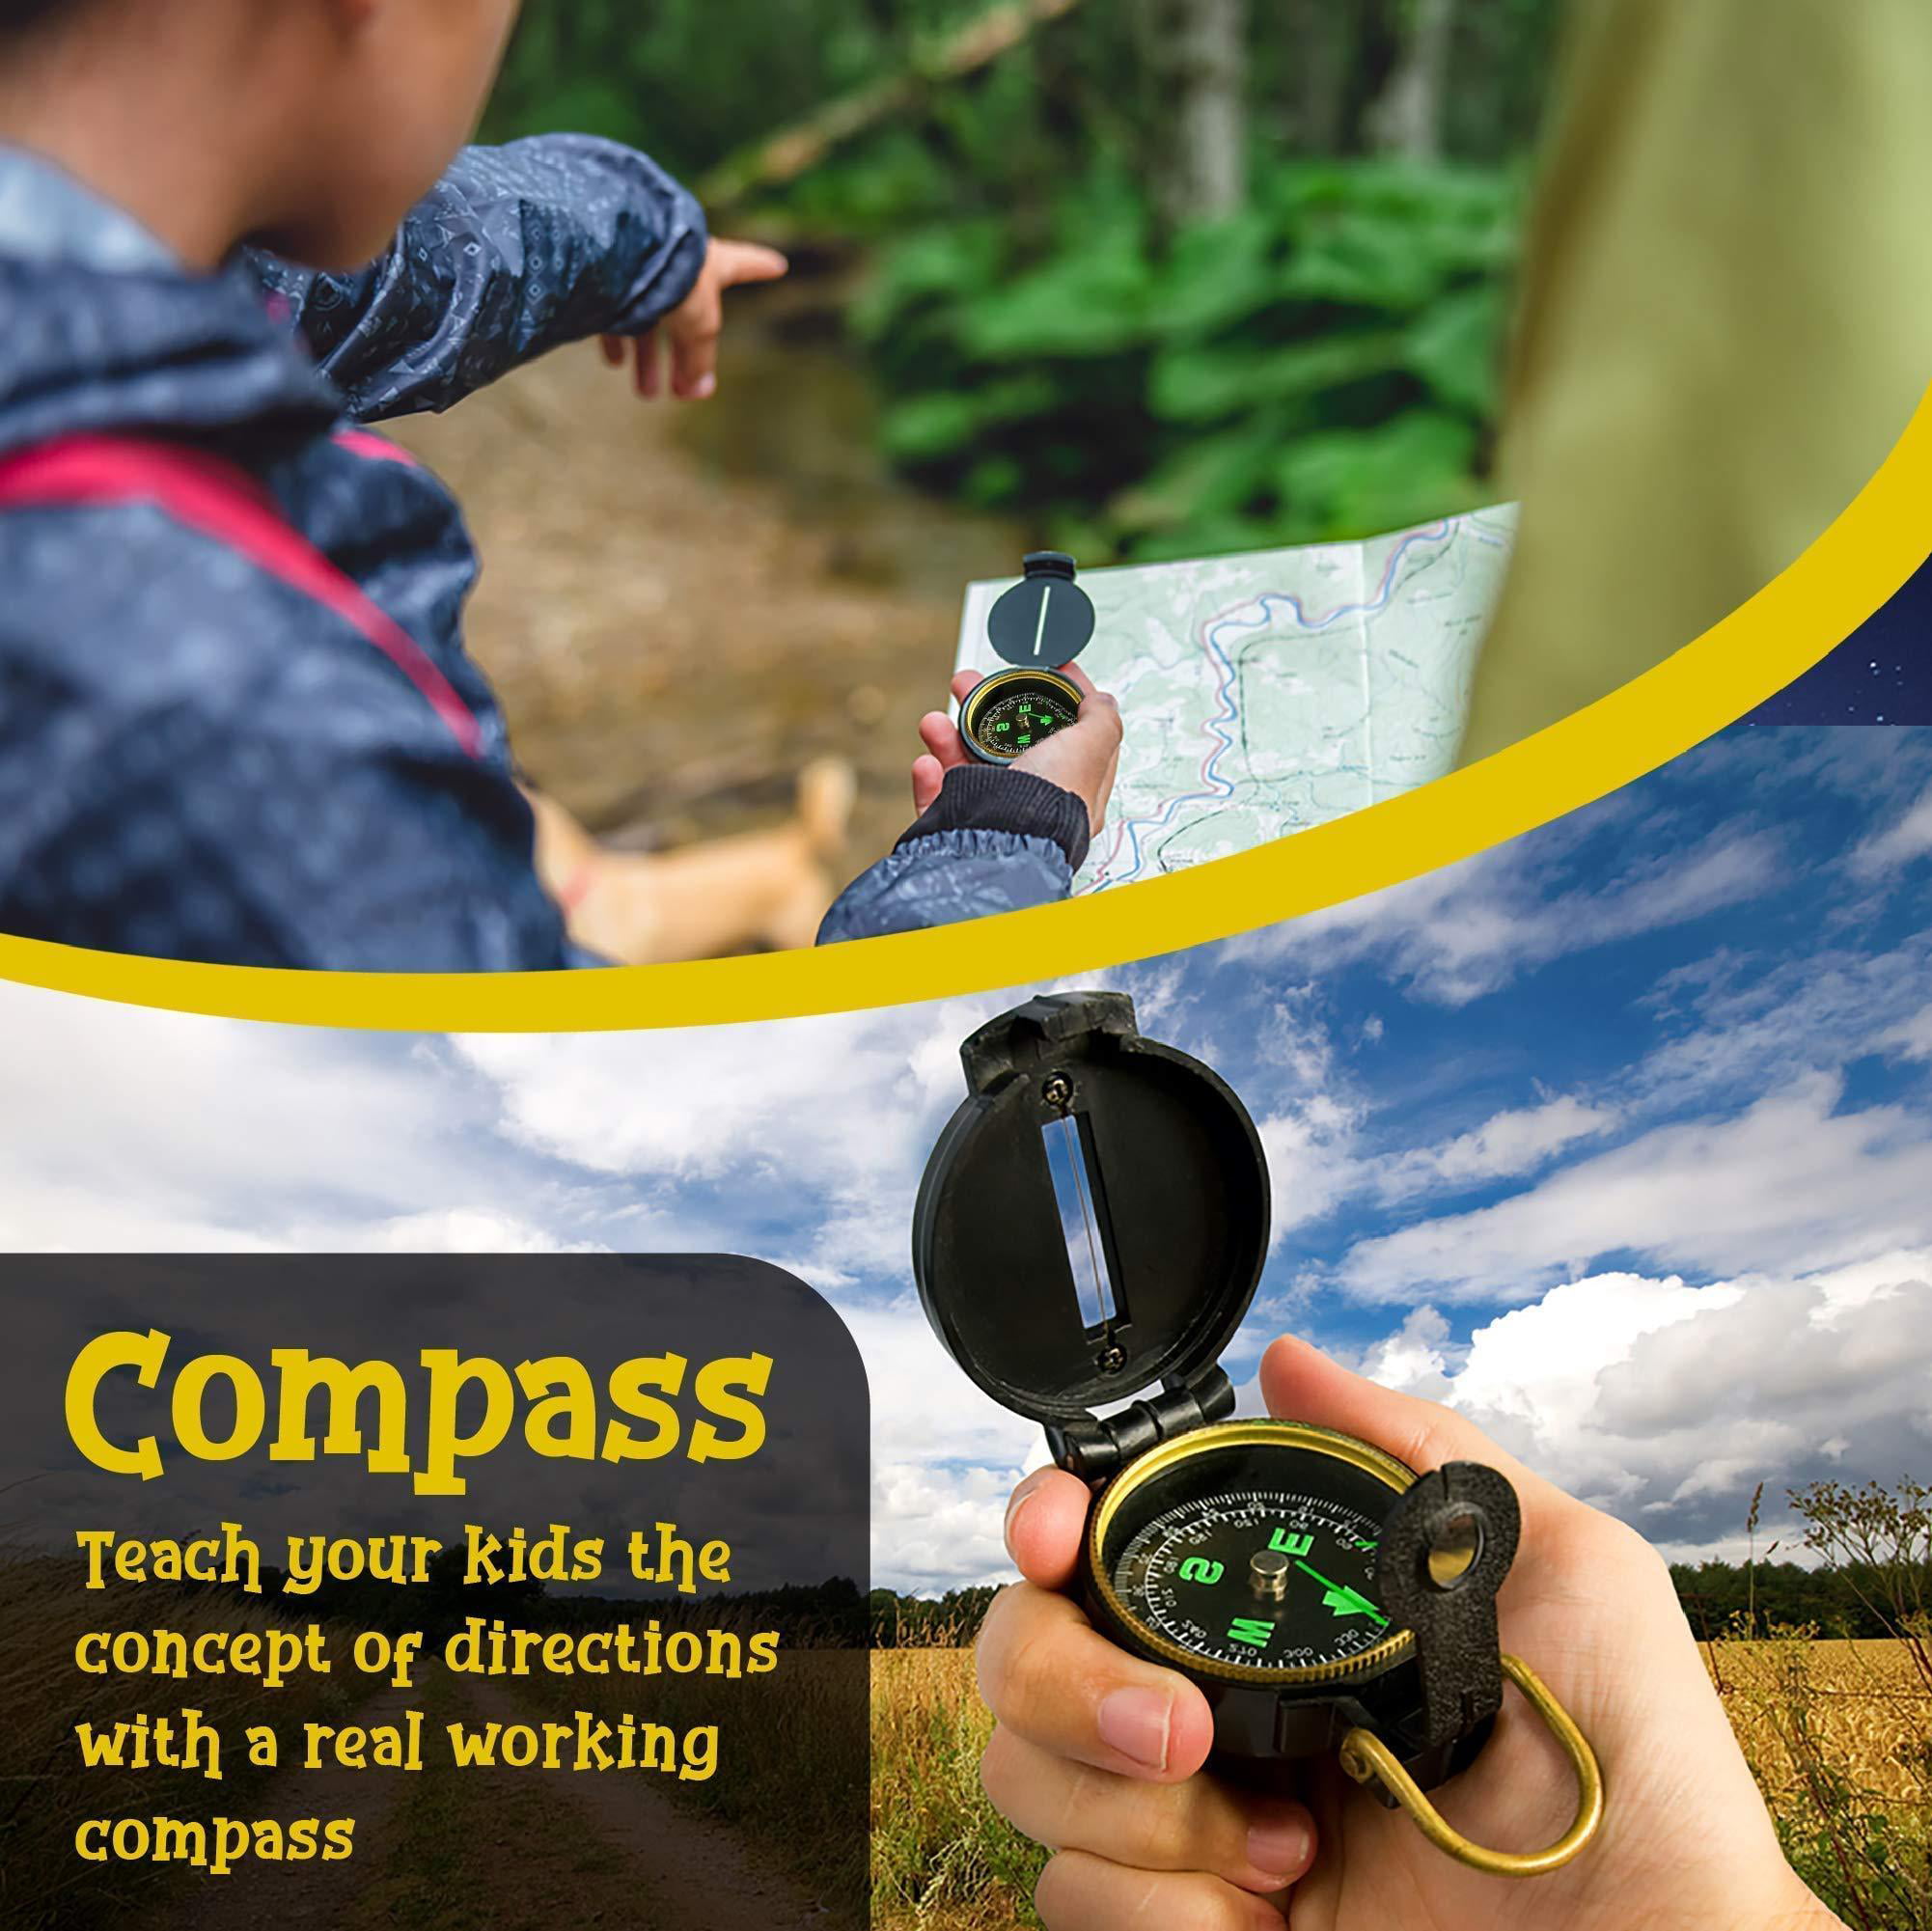 Cool Kids Toys Nature Explorer Kit Compass Whistle Roxy Supply Adventure Set for Kids Binoculars Flashlight & More Educational Playsets STEM Outdoor Kids Toys for Boys & Girls with Backpack 